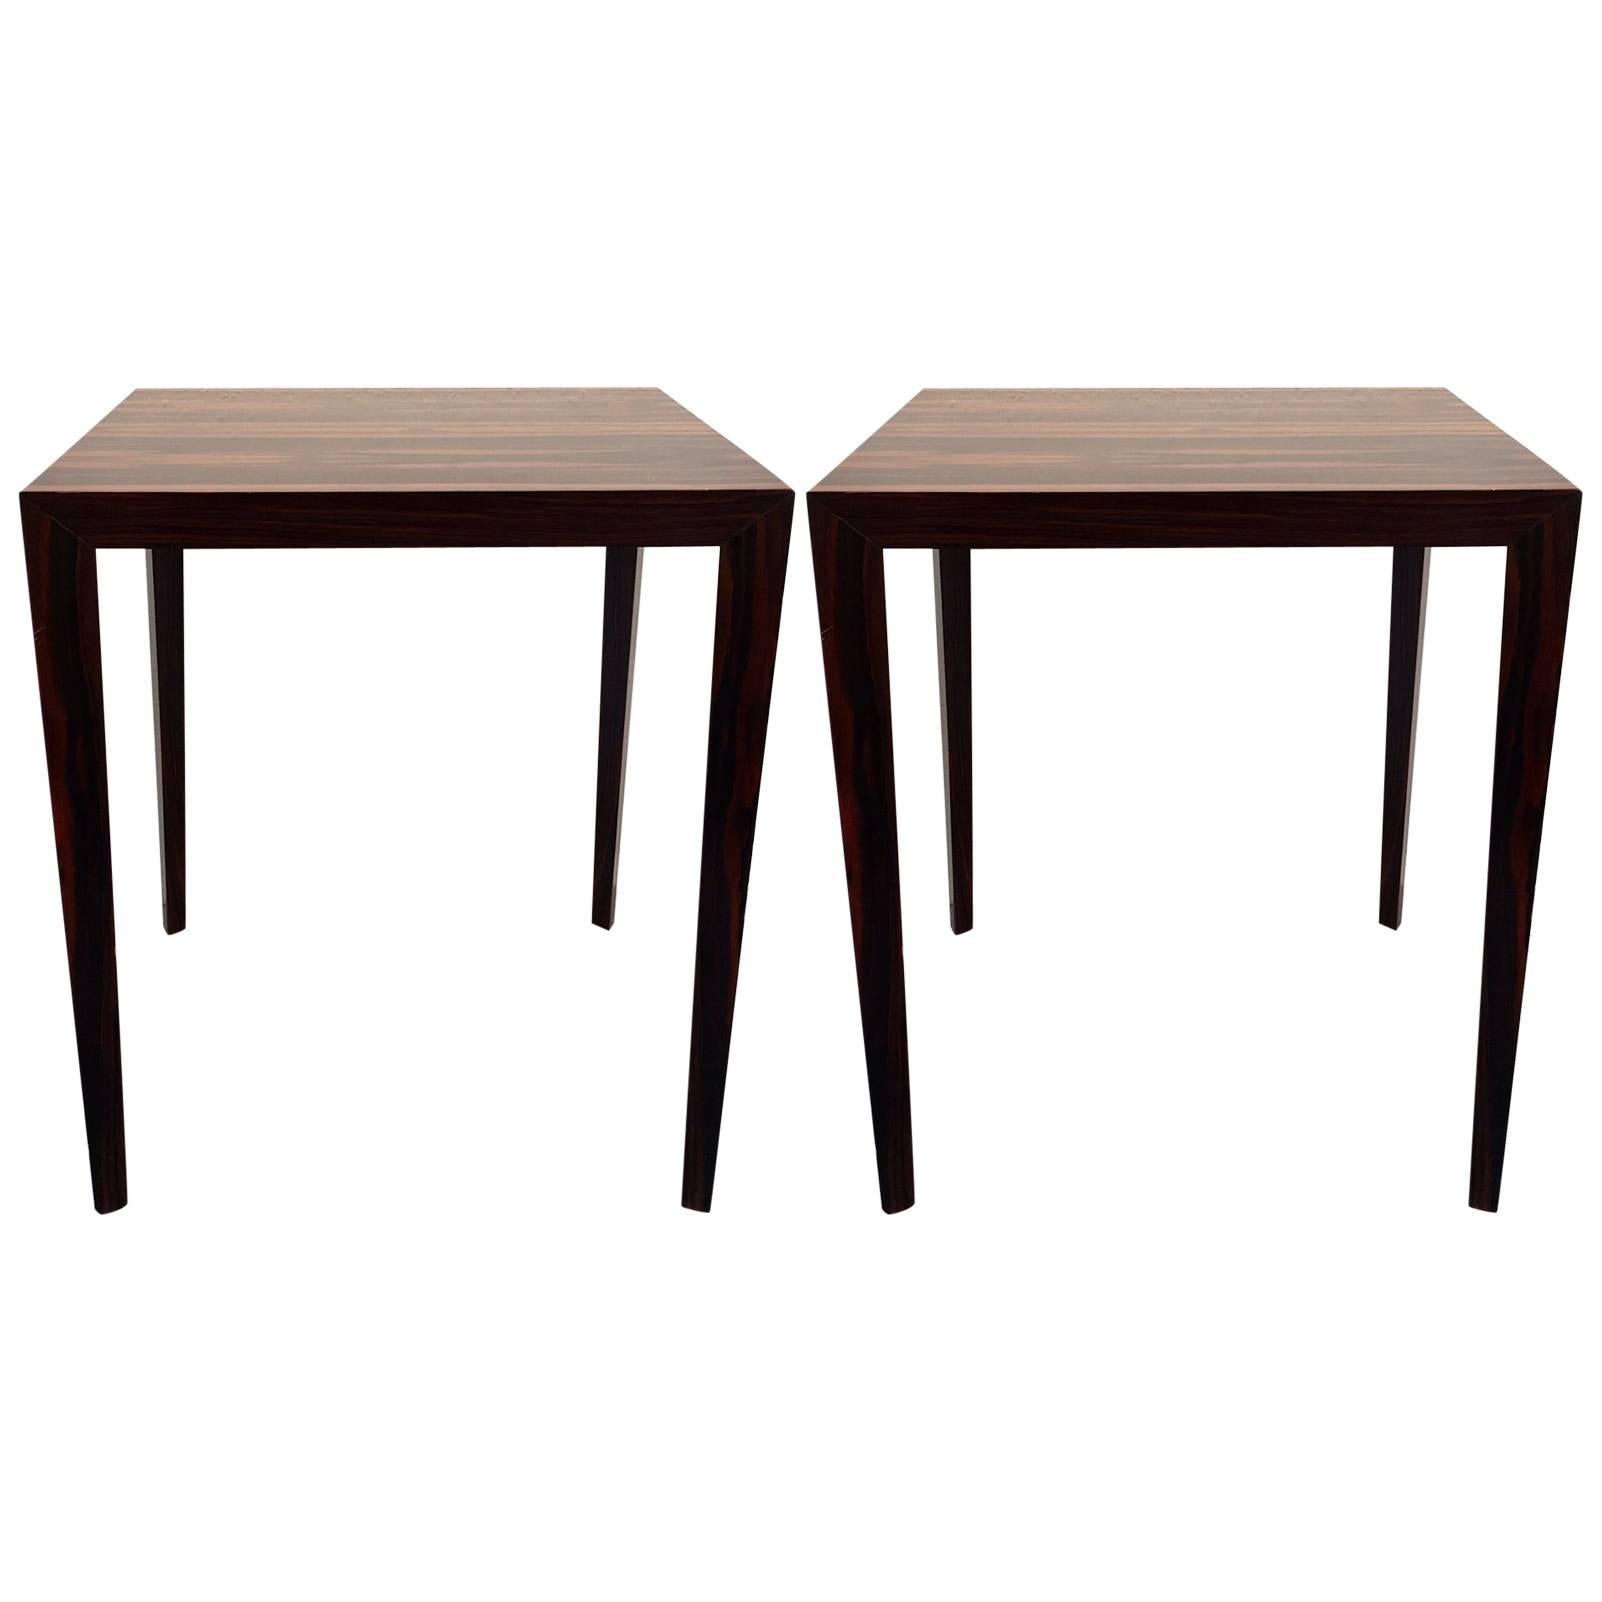 Pair of Deco Style Macassar Ebony Side Tables